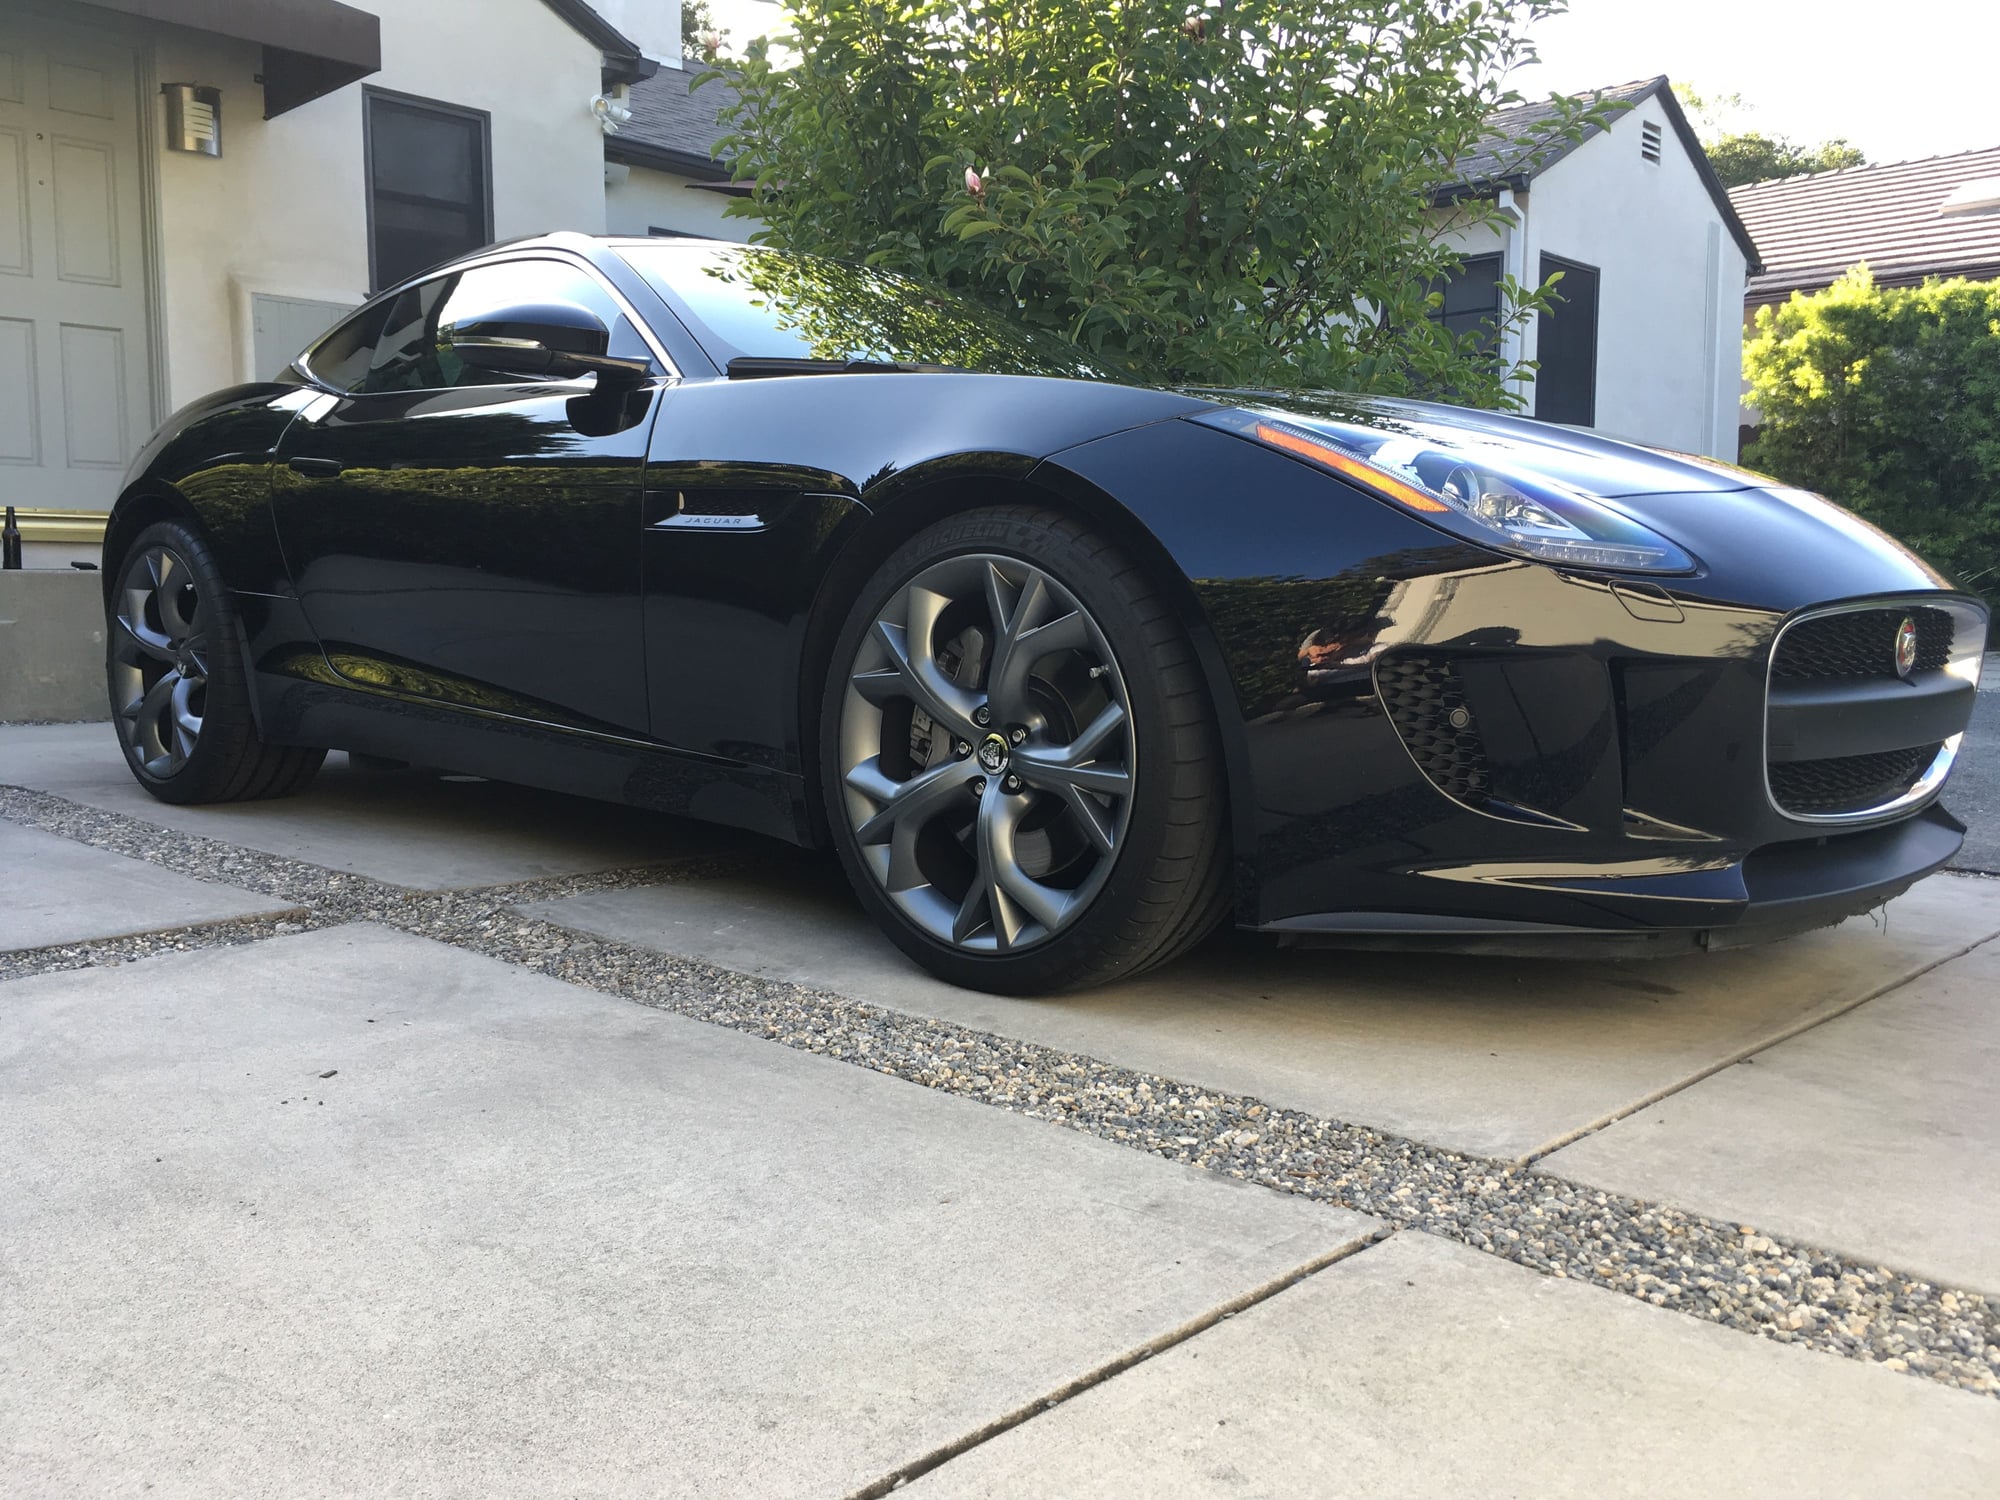 2015 Jaguar F-Type - 2015 F-Type V6 Coupe for Sale - Used - VIN SAJWA6AT8F8K22008 - 36,250 Miles - 6 cyl - 2WD - Automatic - Coupe - Black - Pasadena, CA 91103, United States